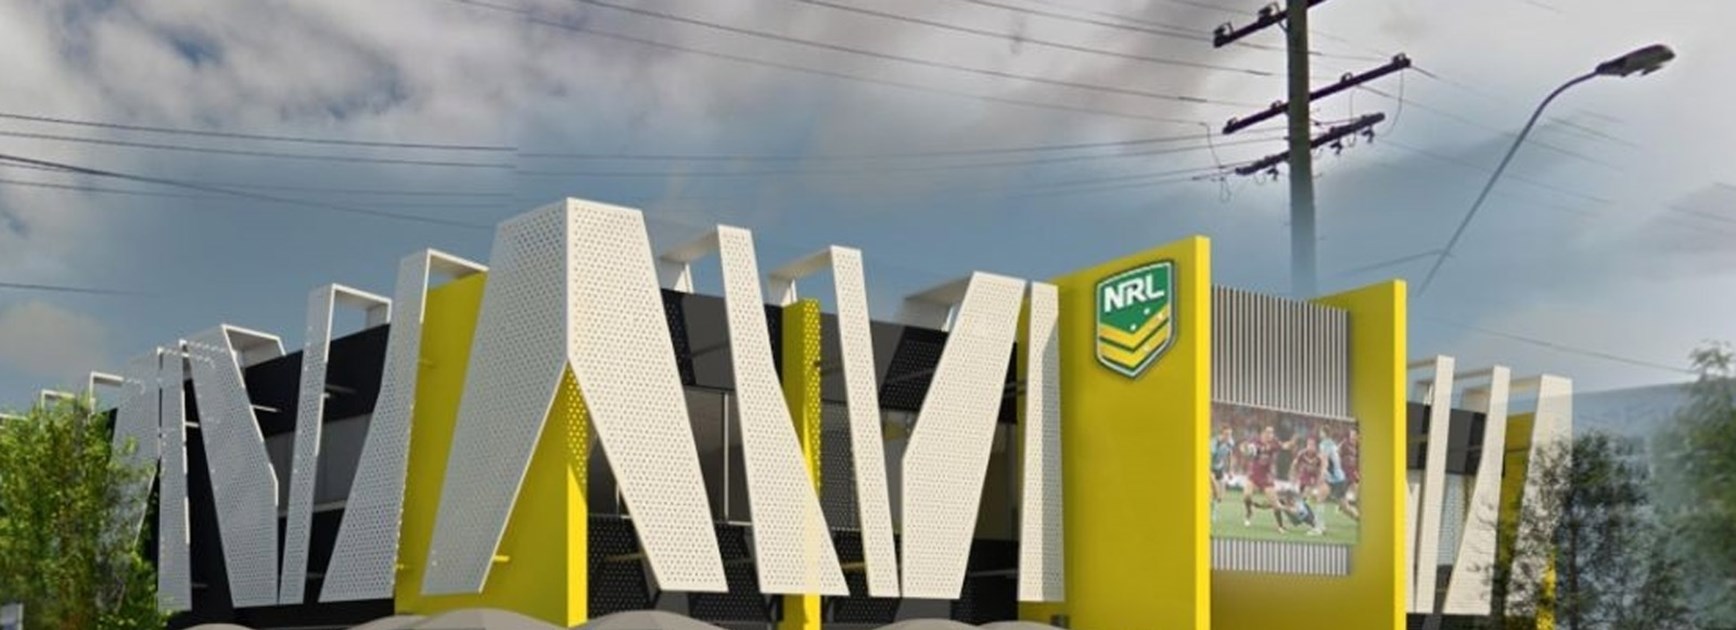 The key stakeholders of rugby league in Queensland will all be under one roof with a new centre to be built next to Suncorp Stadium.